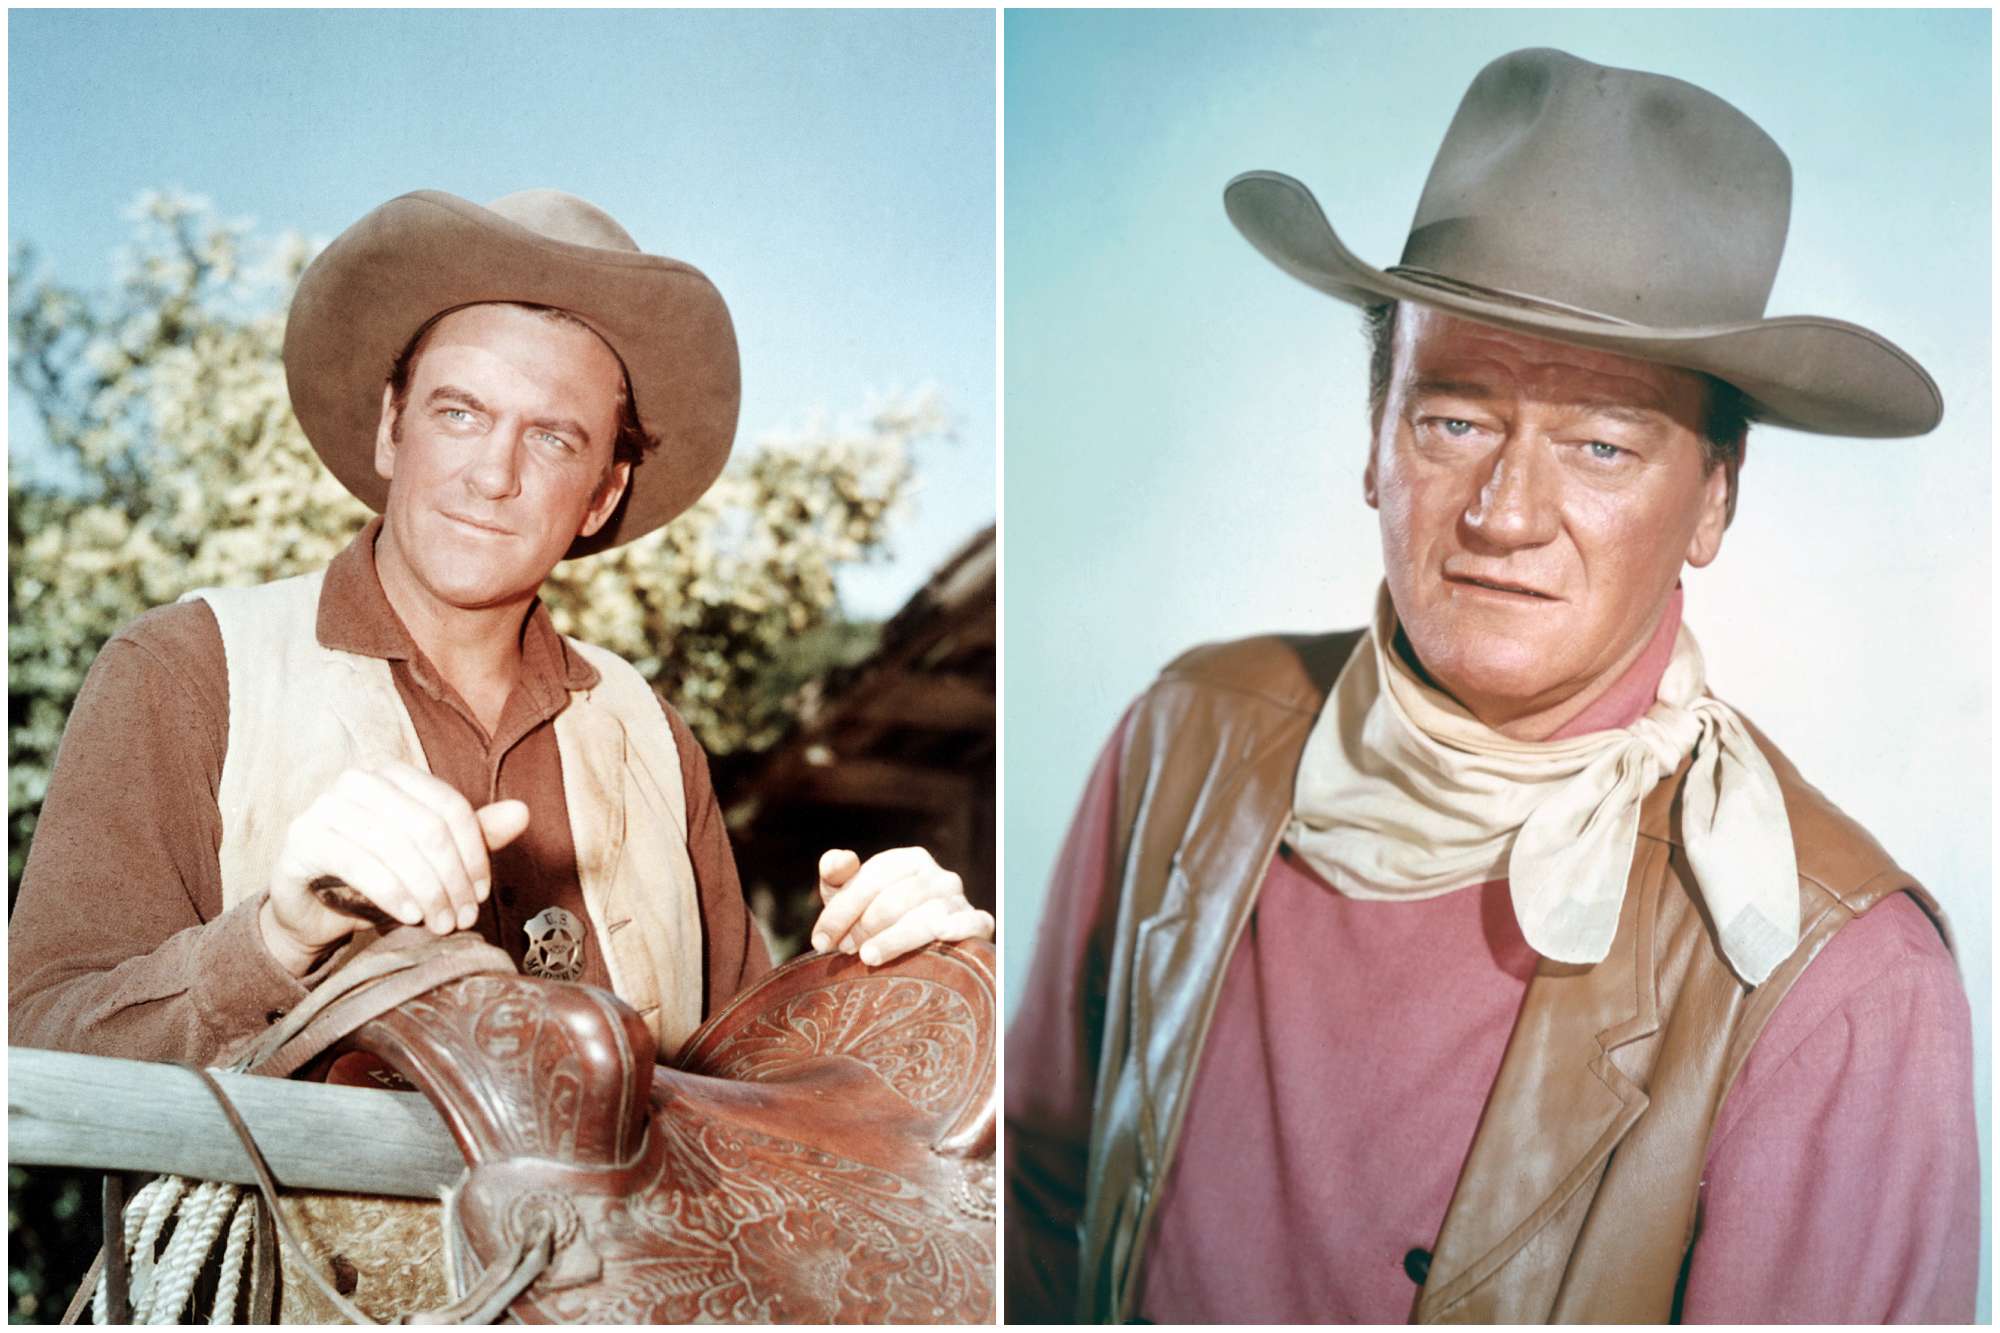 'Gunsmoke' actor James Arness and movie star John Wayne. Arness is wearing a Western costume with his hands on a horse saddle. Wayne is looking into the camera wearing. Western costume.